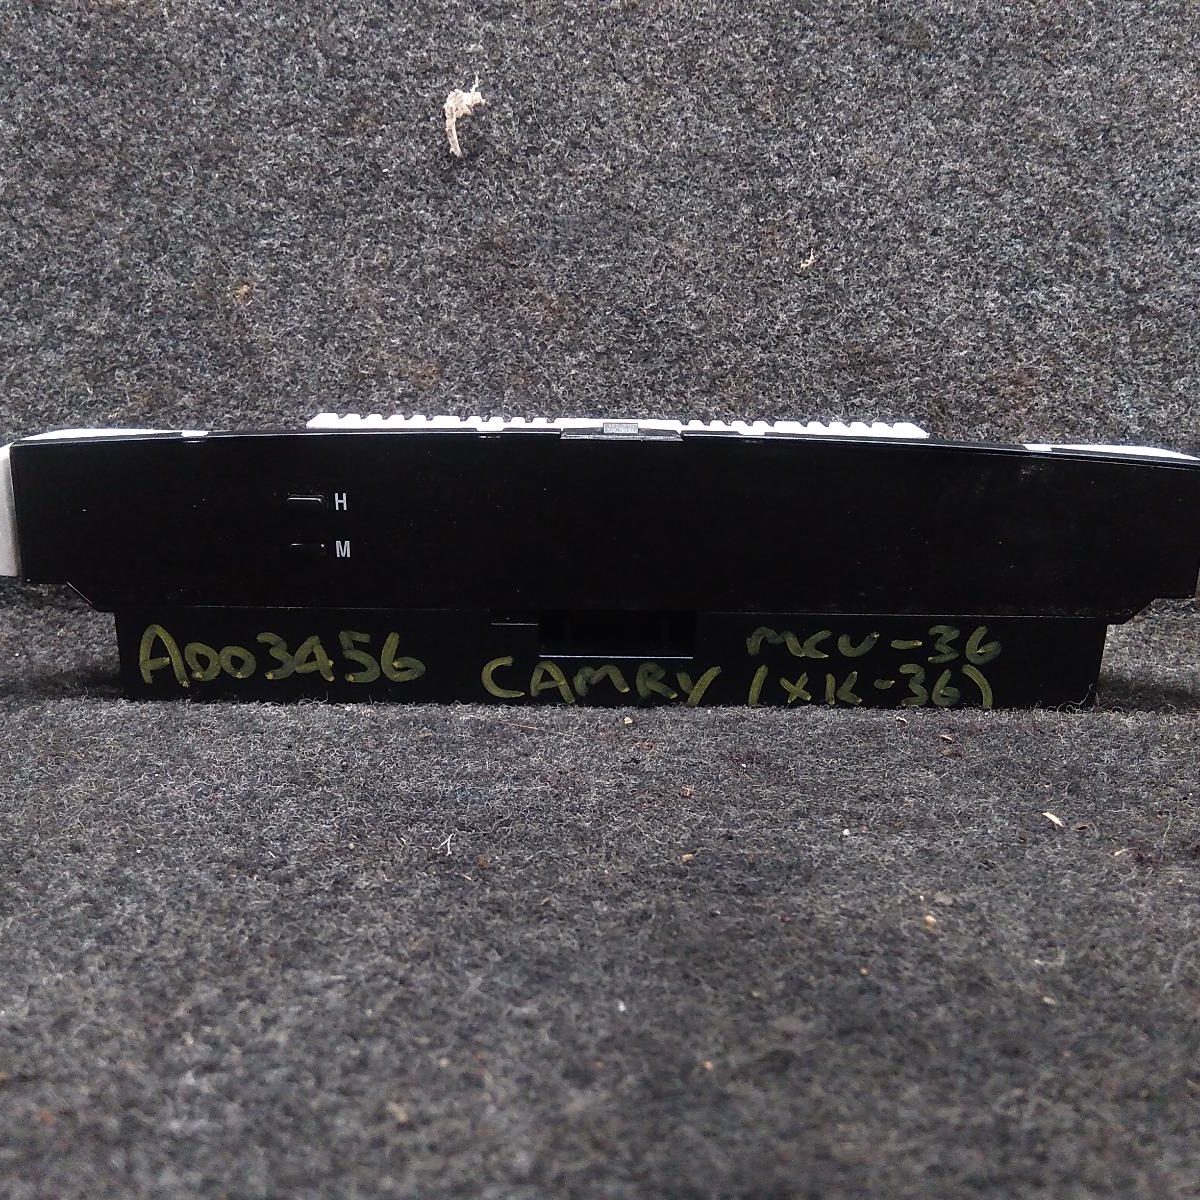 2006 TOYOTA CAMRY INSTRUMENT CLUSTER